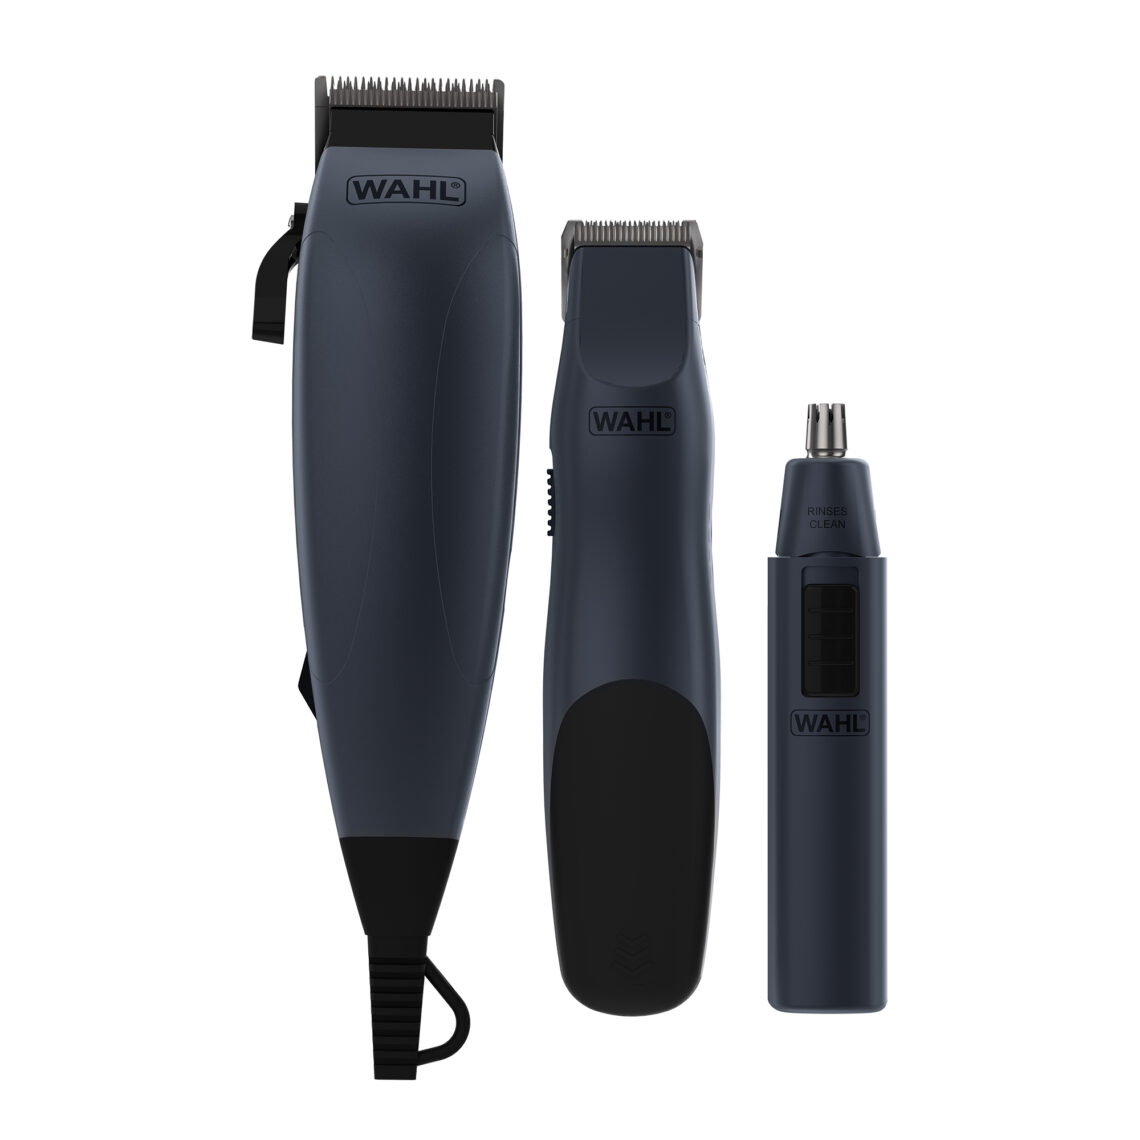 wahl hair clippers how to clean